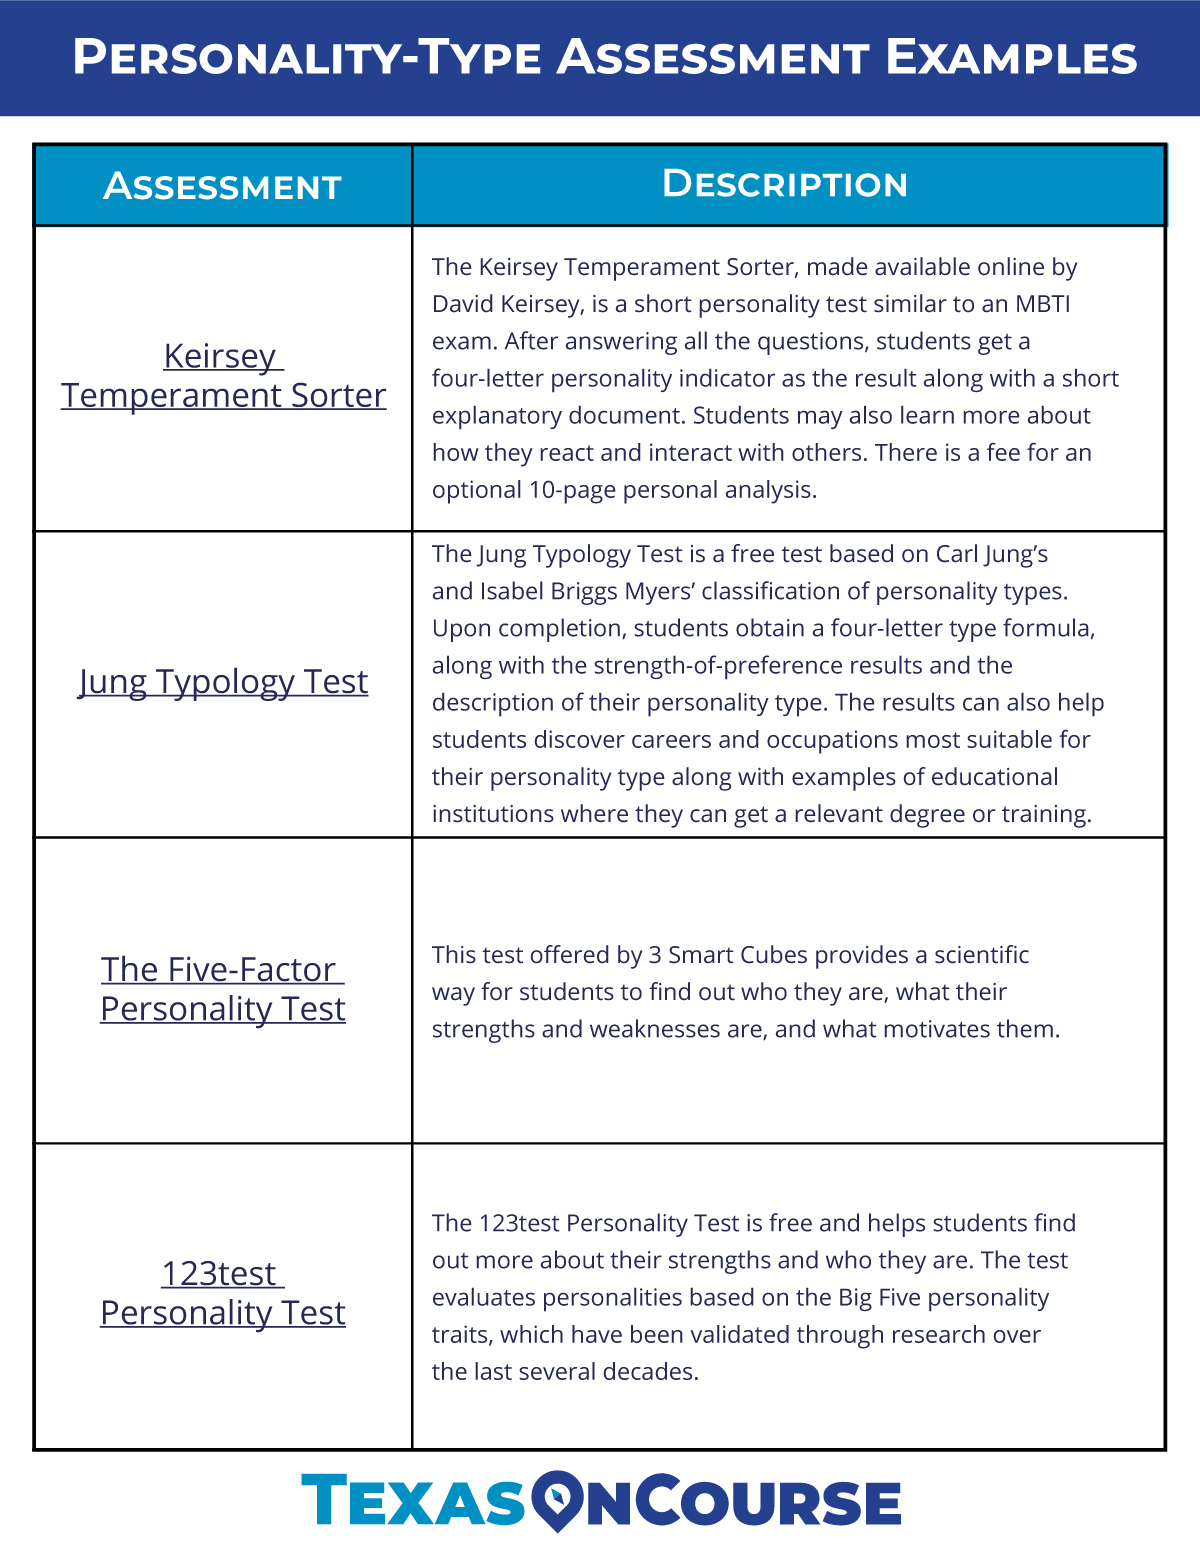 Personality-Type Assessment Examples